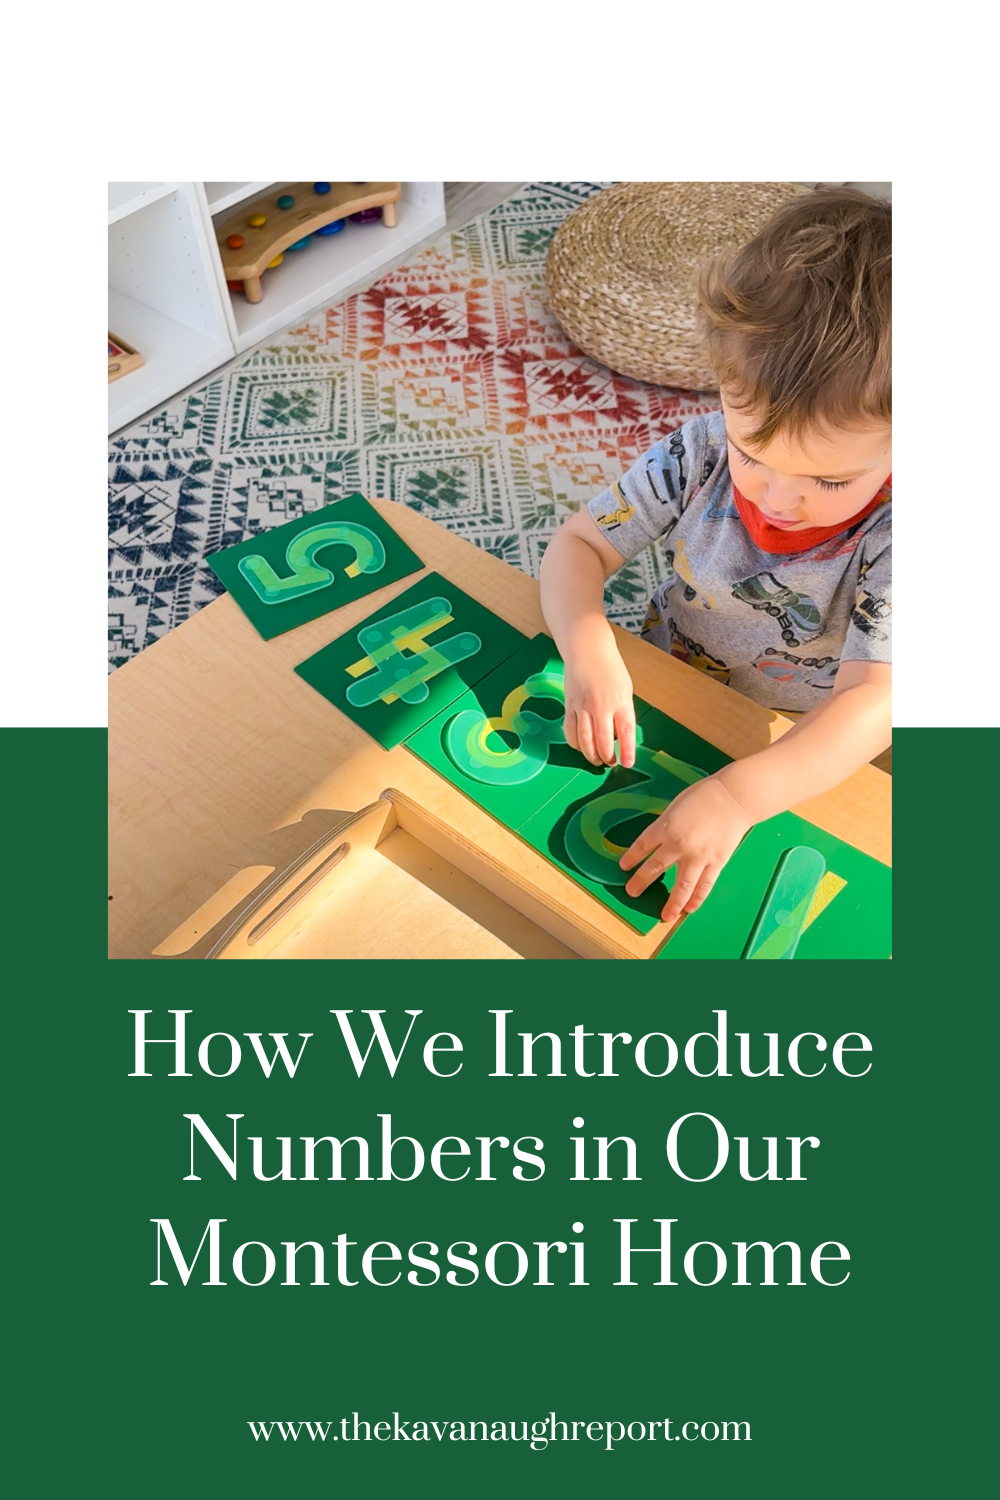 Montessori takes a unique approach to introducing numbers to children, here is a look at how and when we introduce numbers in our Montessori home. This includes which toys and activities we use to help our toddlers and preschoolers learn their numbers.